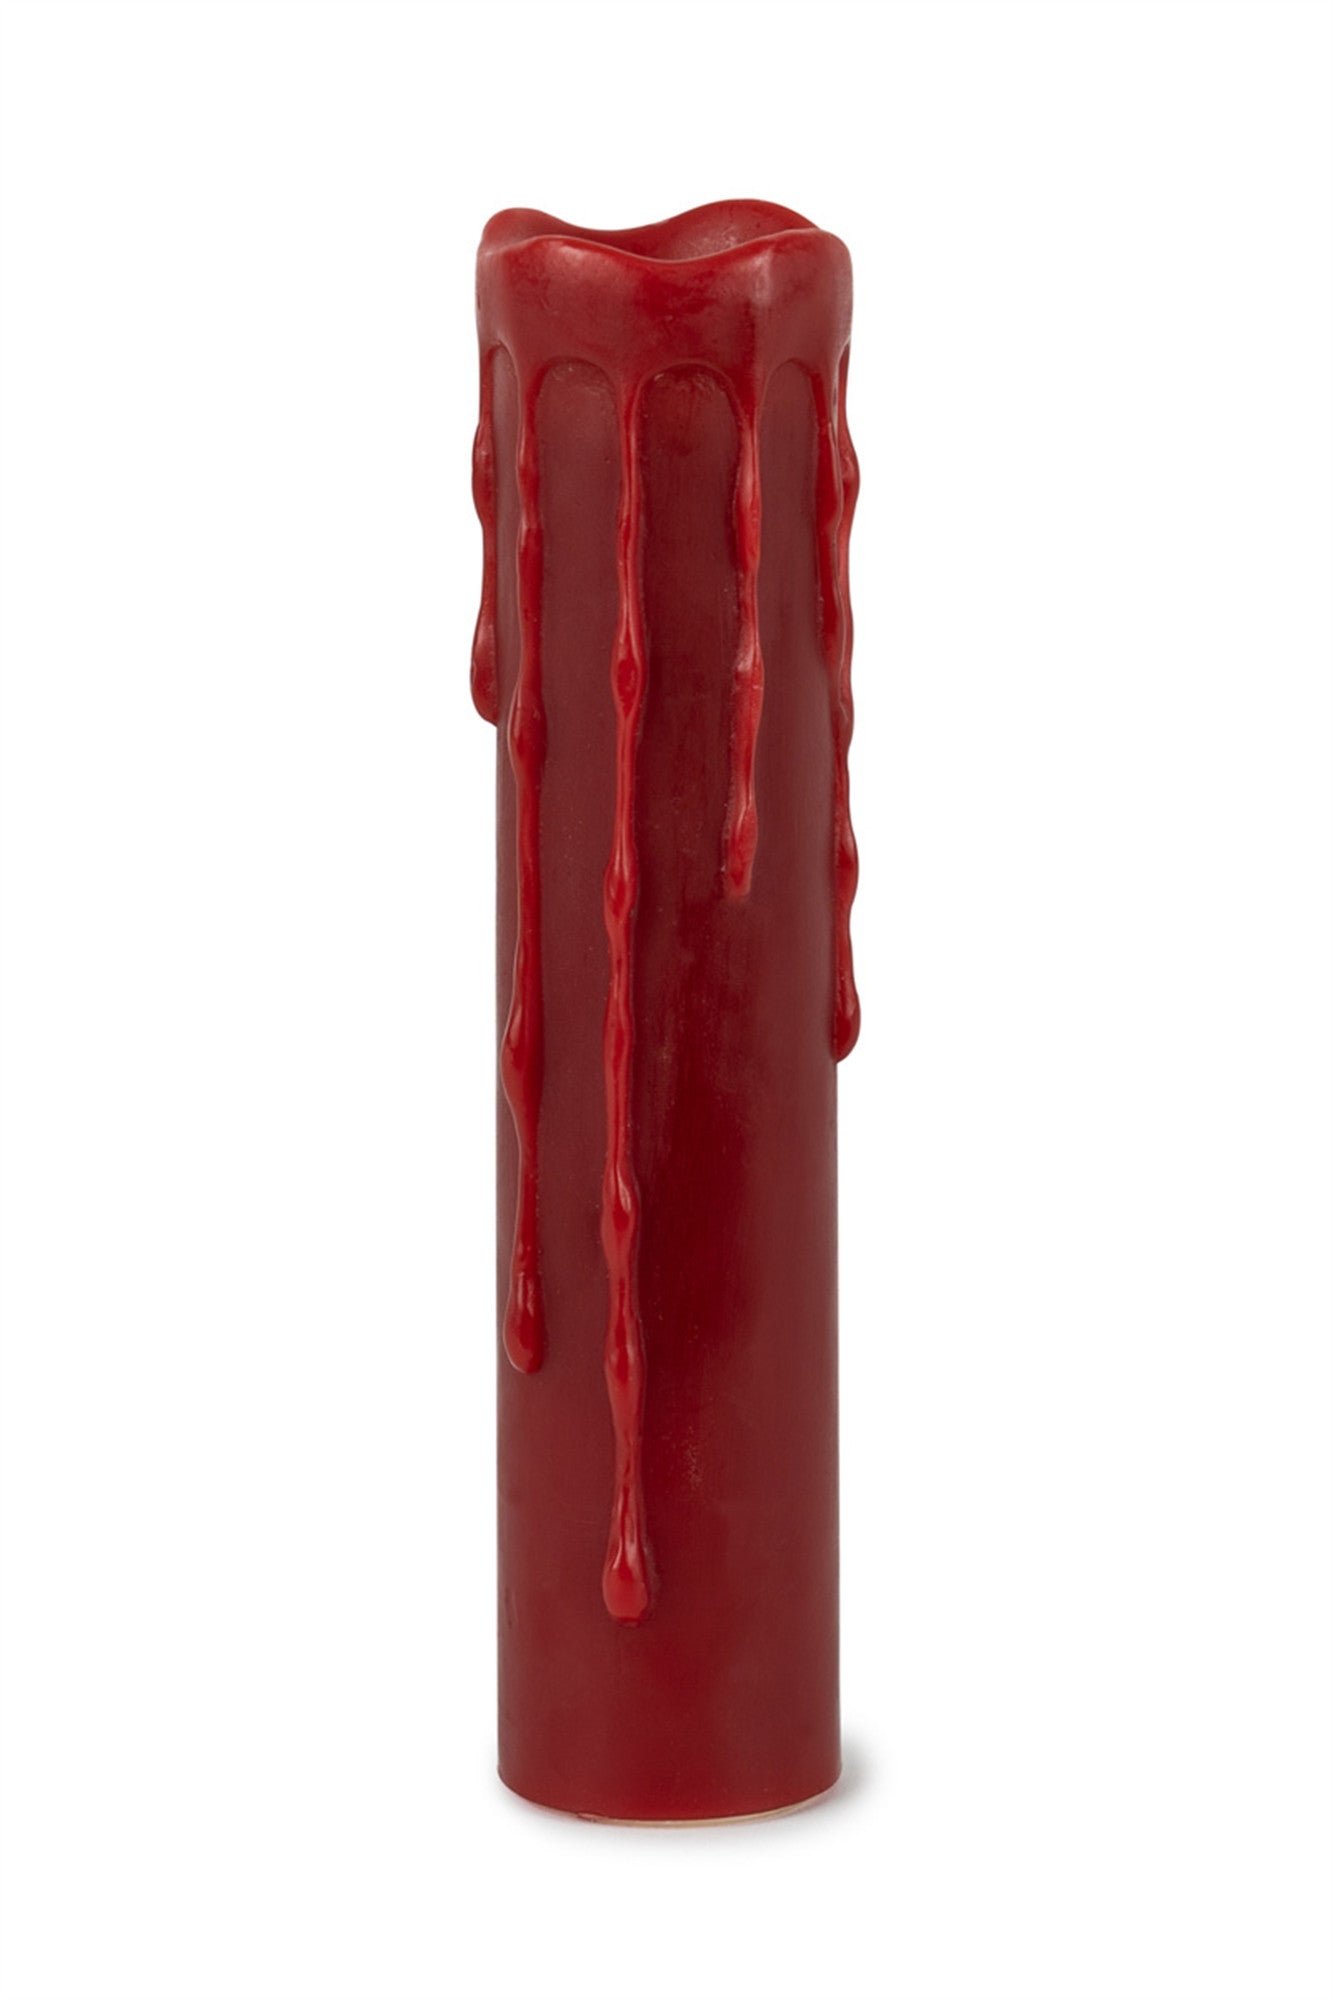 Set of Two Red Flameless Pillar Candle